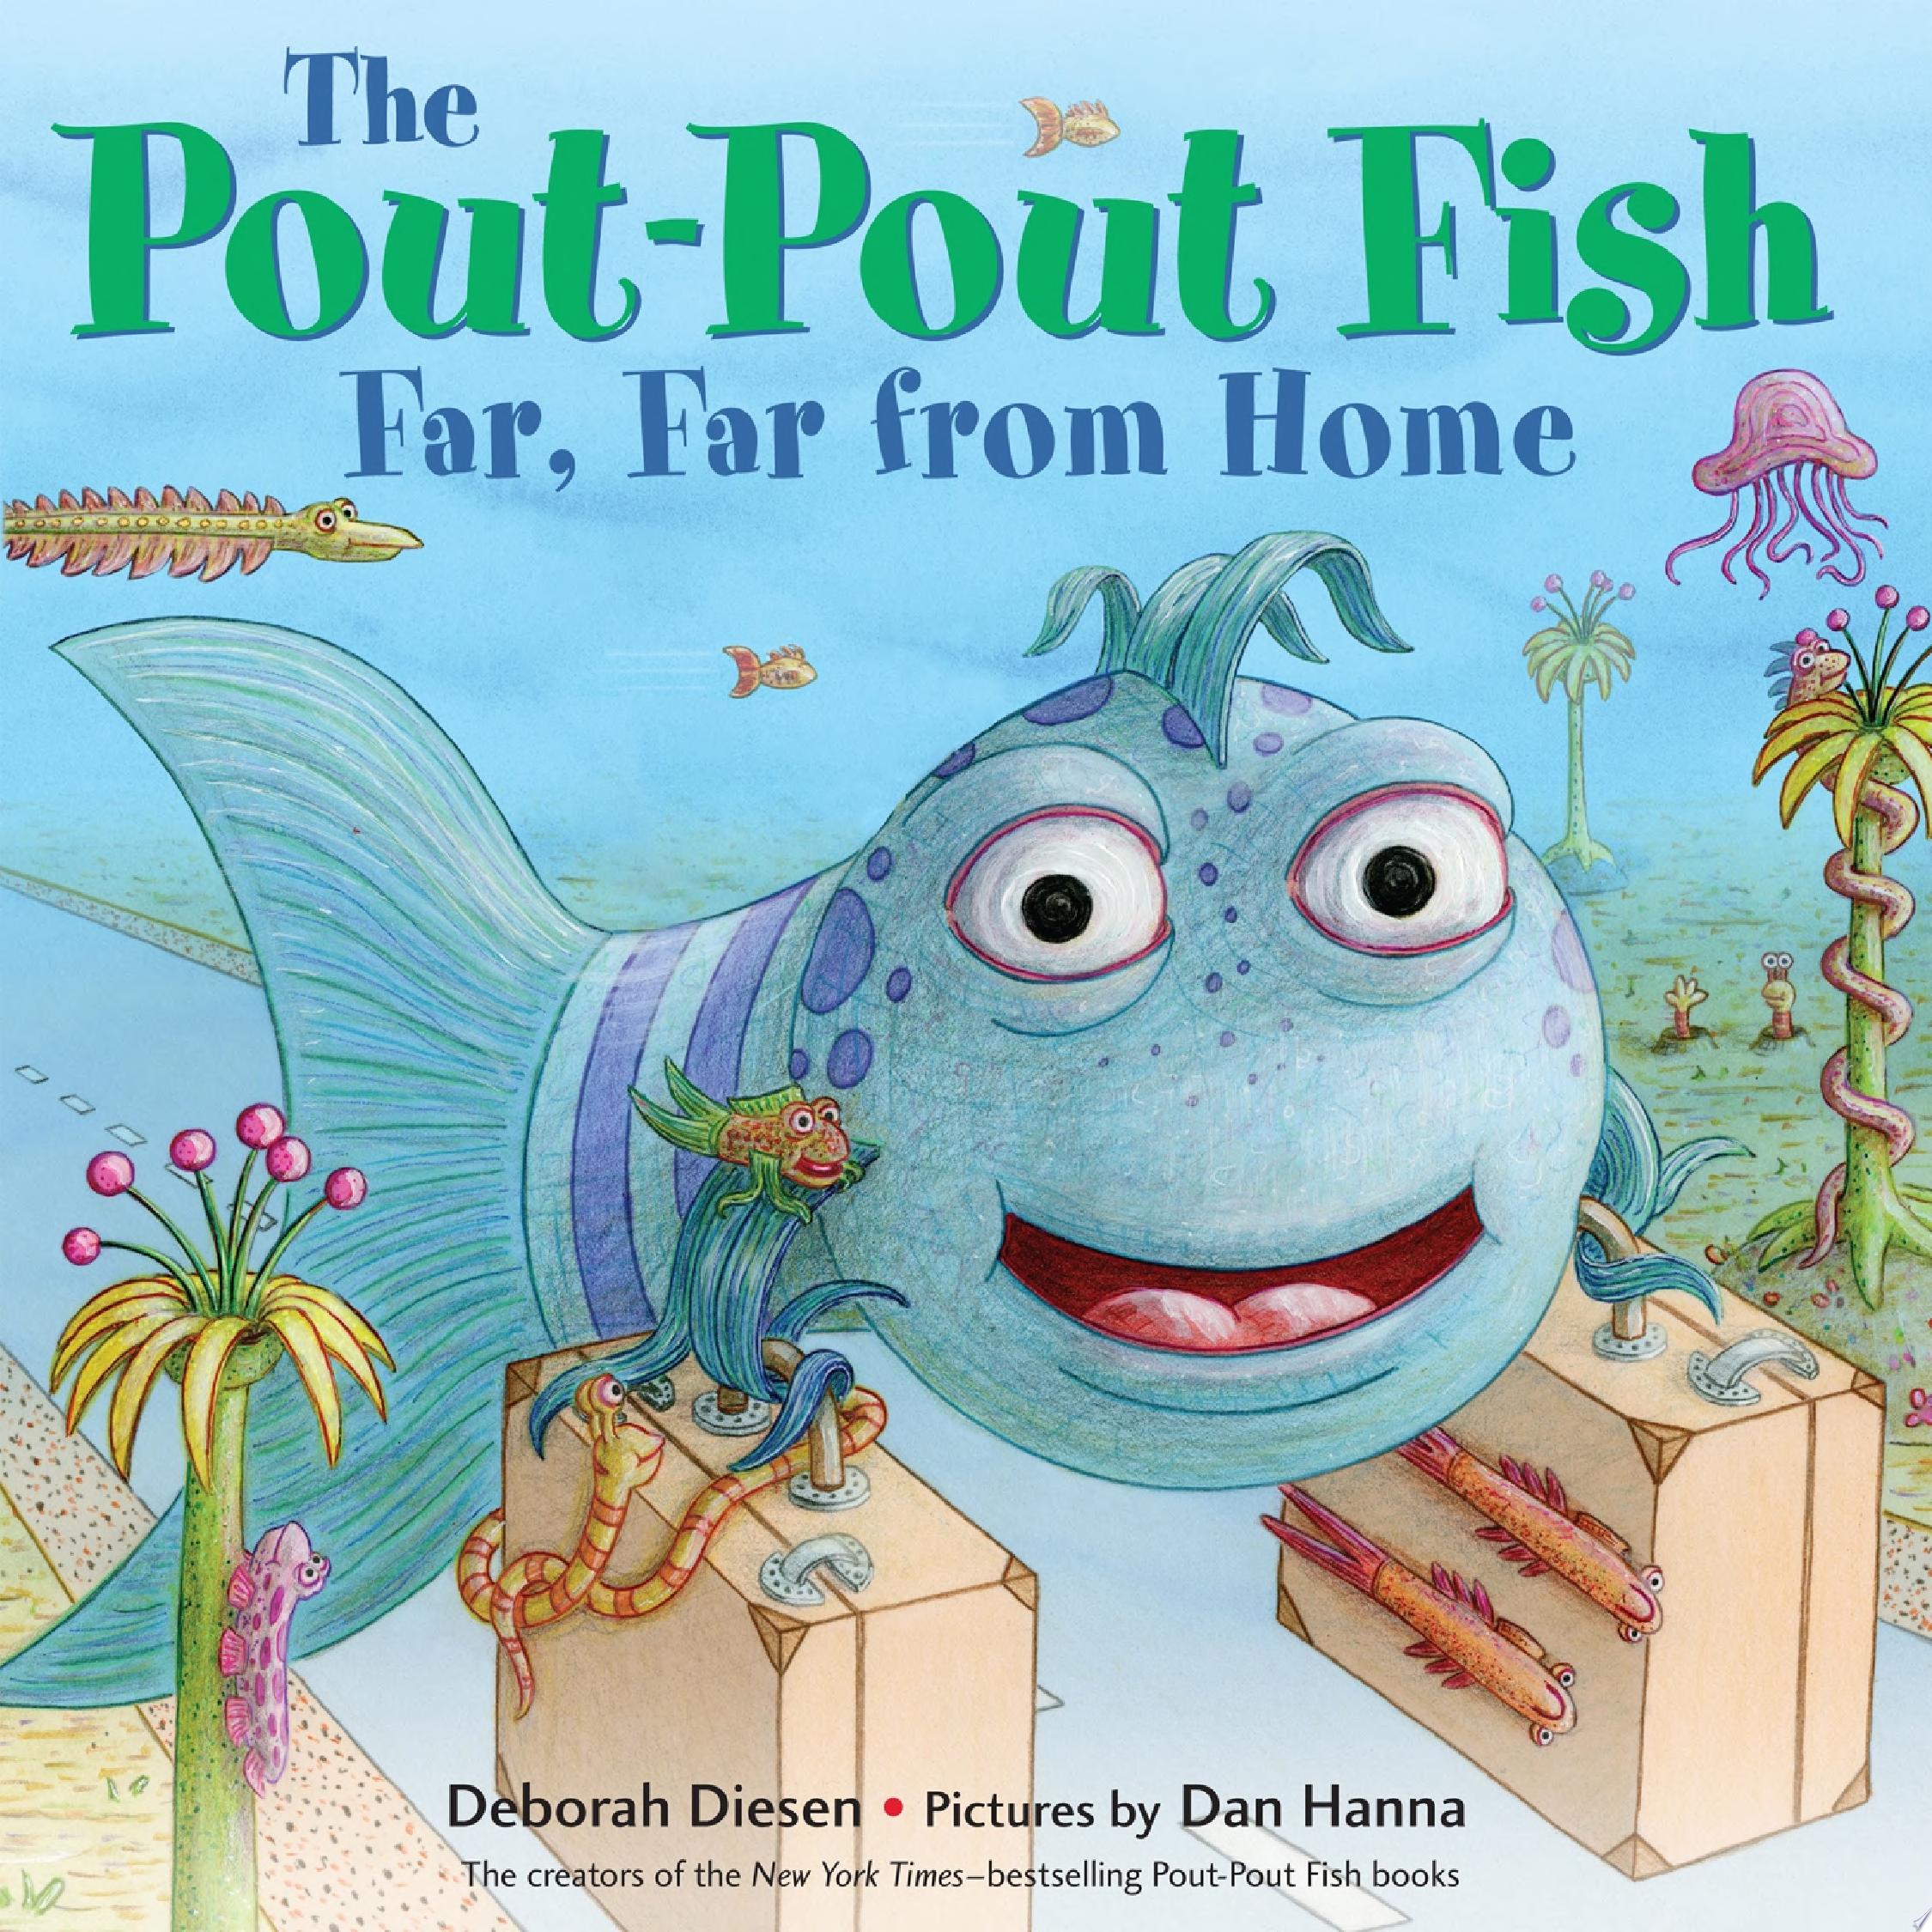 Image for "The Pout-Pout Fish, Far, Far from Home"